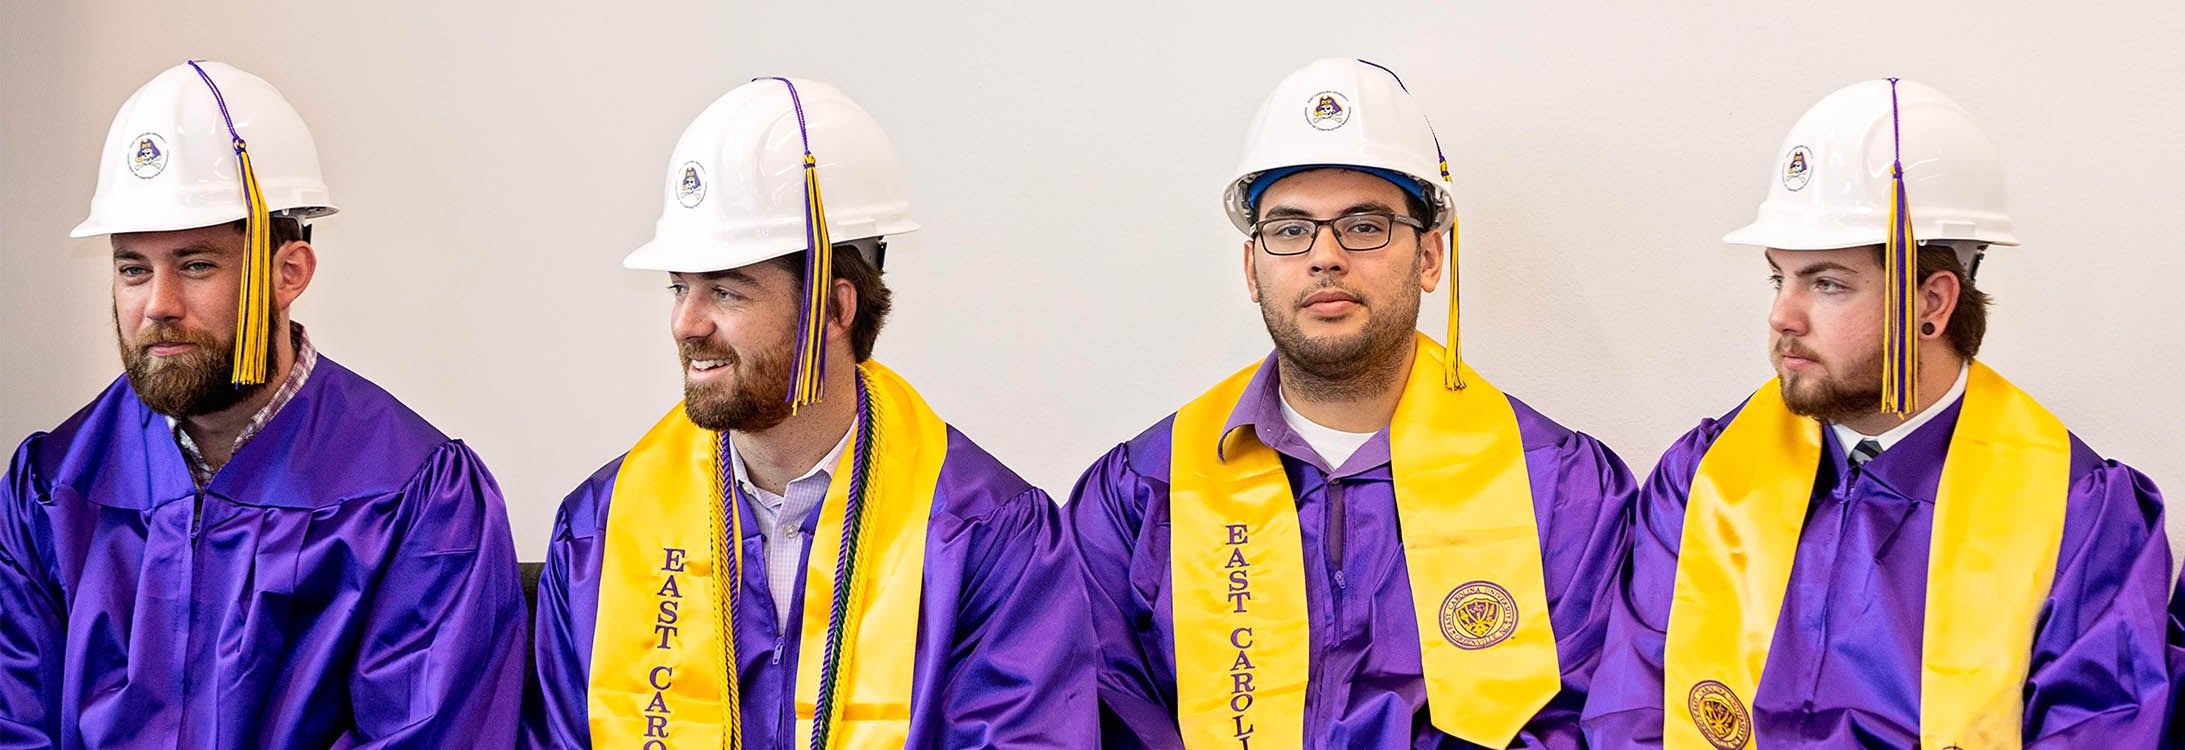 Construction Management graduates are shown in their traditional hard hats during commencement in December. Spring 2020 graduates will receive their hard hats by mail. (Photo by Cliff Hollis)